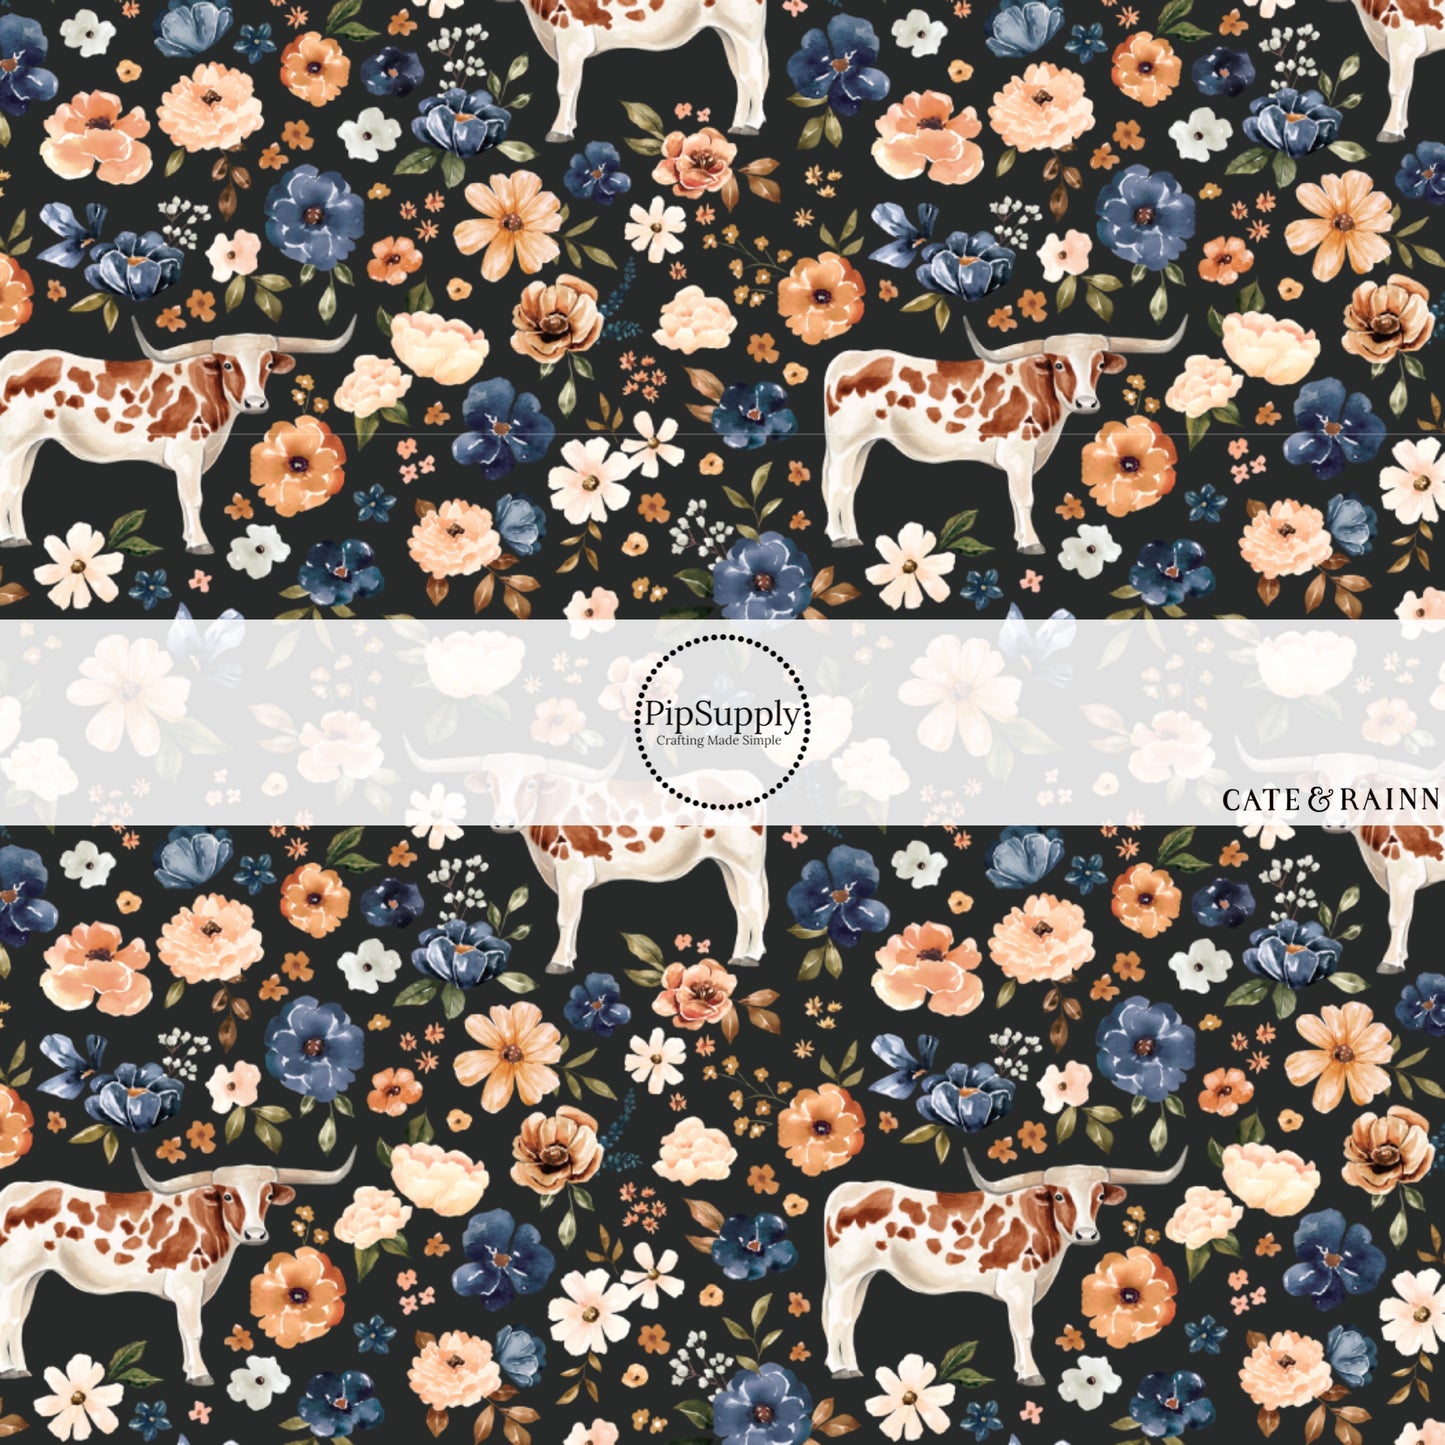 These spring and summer pattern fabric by the yard features farm and meadow cows. This fun fabric can be used for all your sewing and crafting needs!